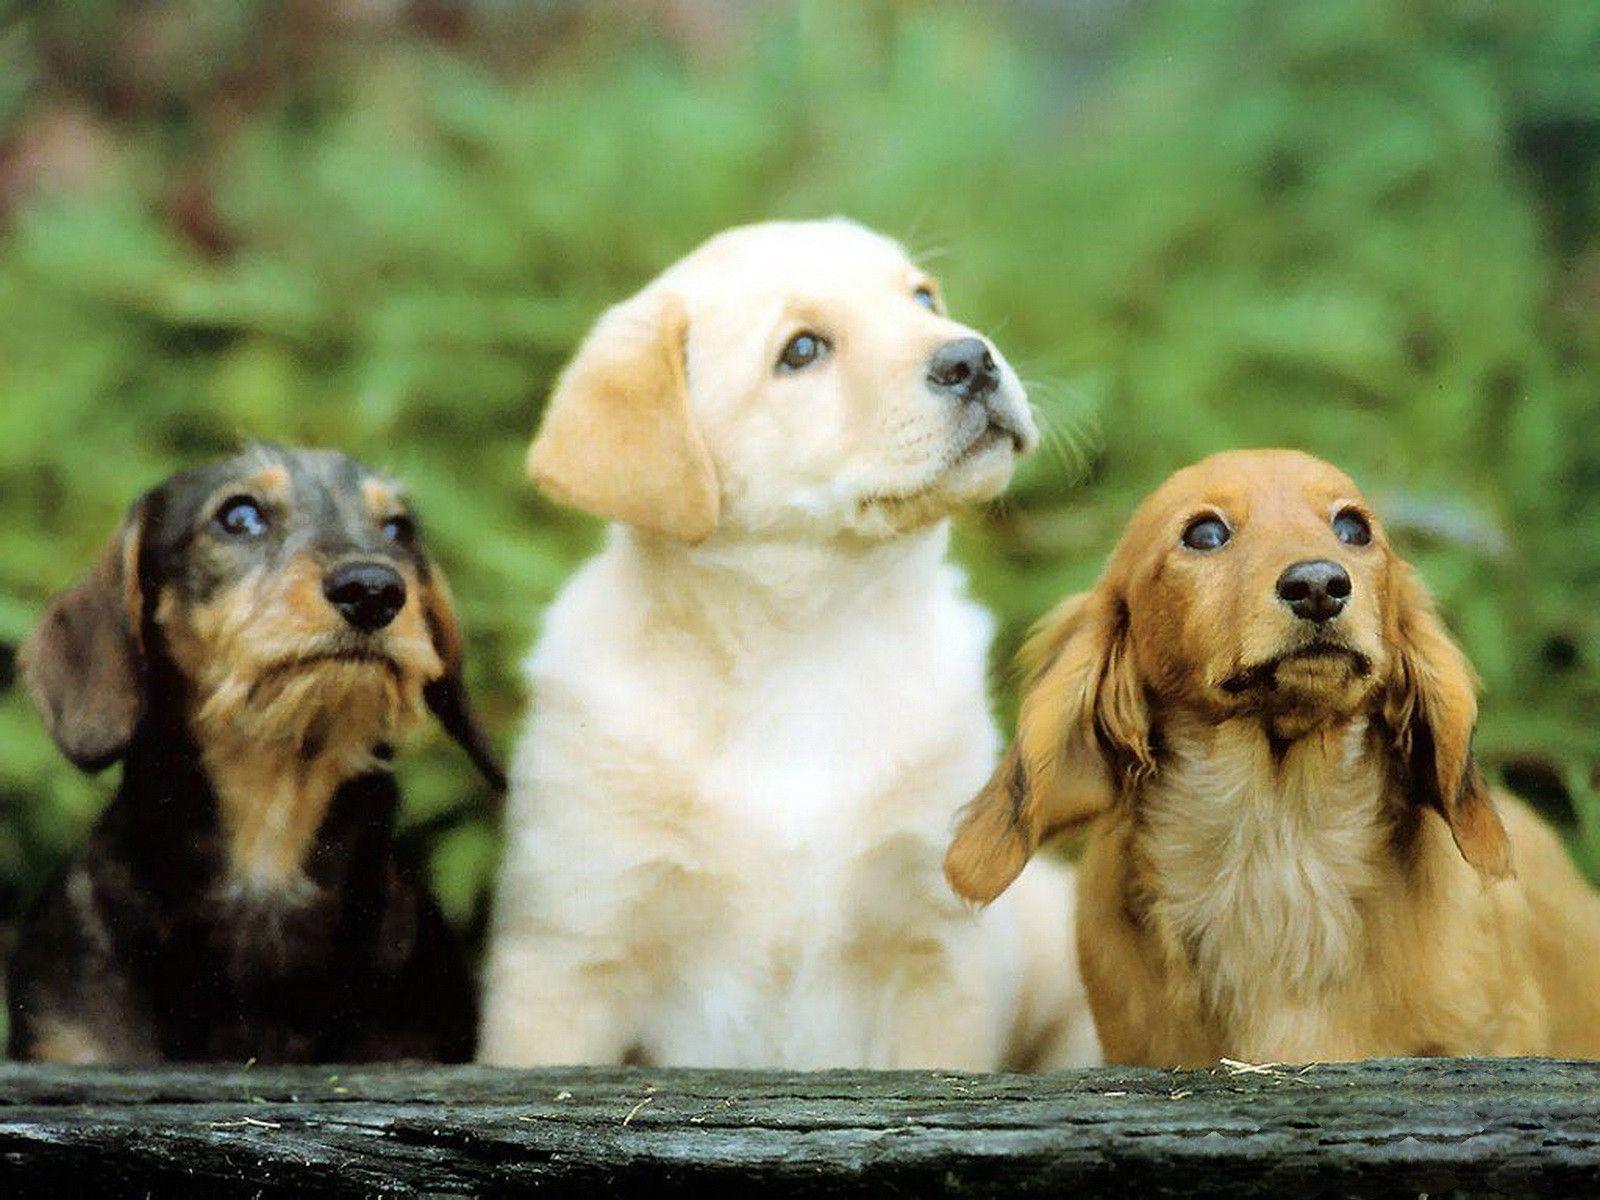 Cute Baby Dogs Wallpaper Baby Dog Wallpaper